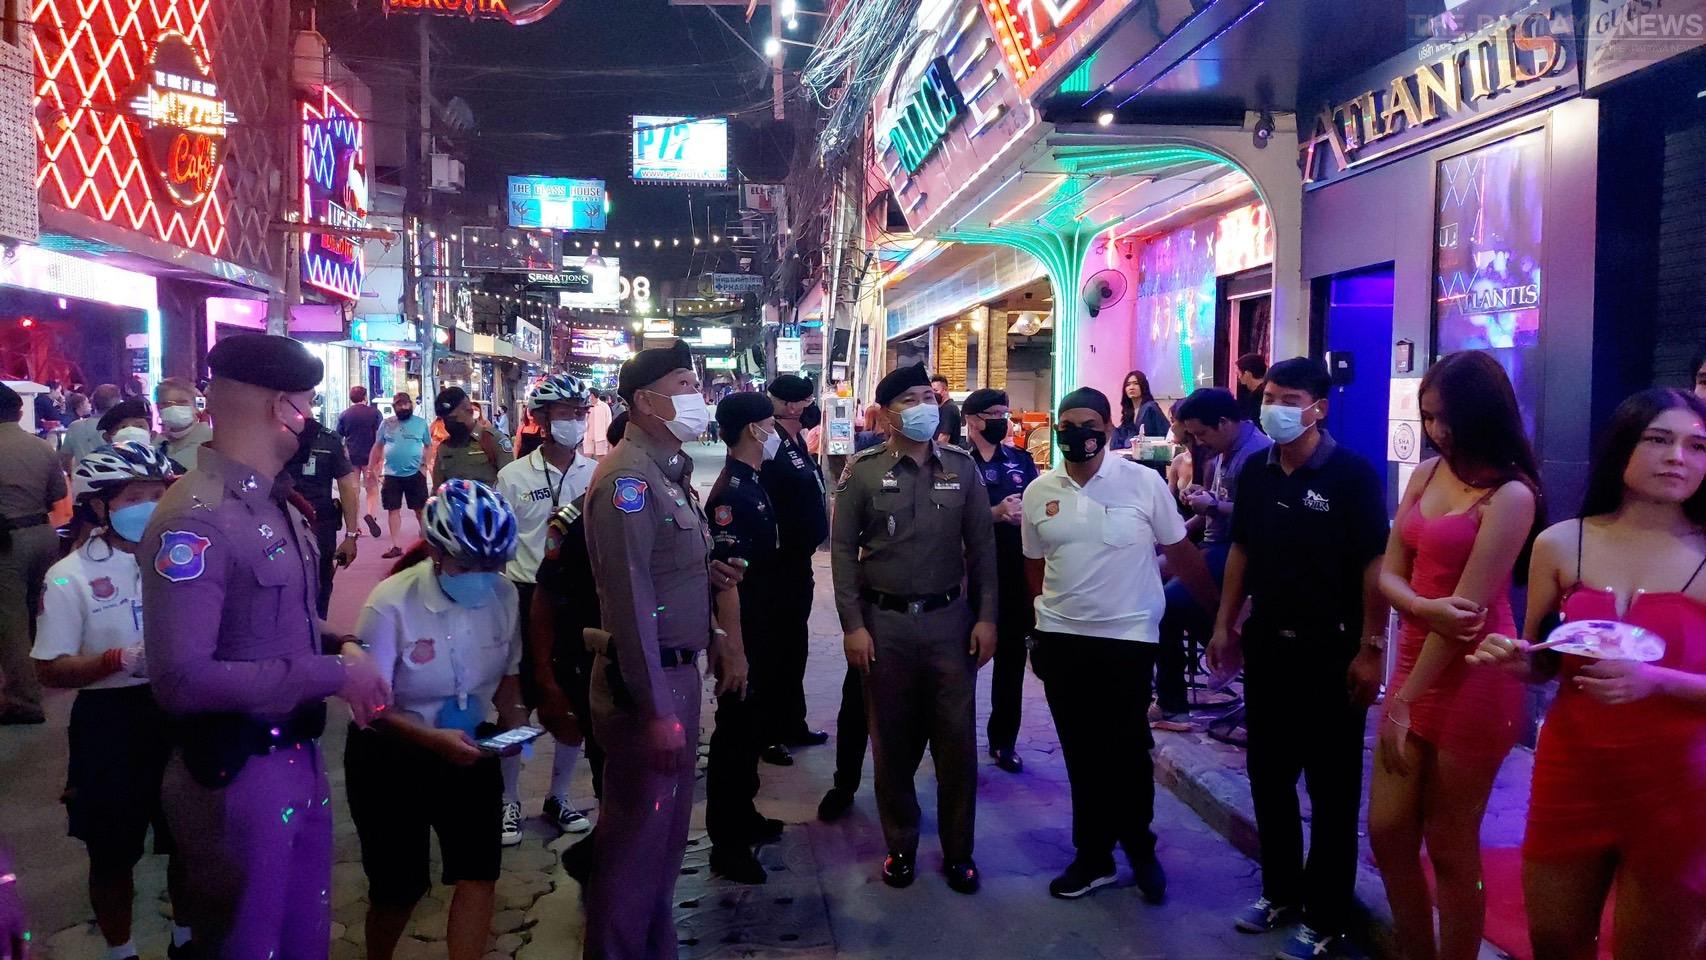 Pattaya police resume checkpoints on Walking Street and ask guards to look out for inappropriate incidents